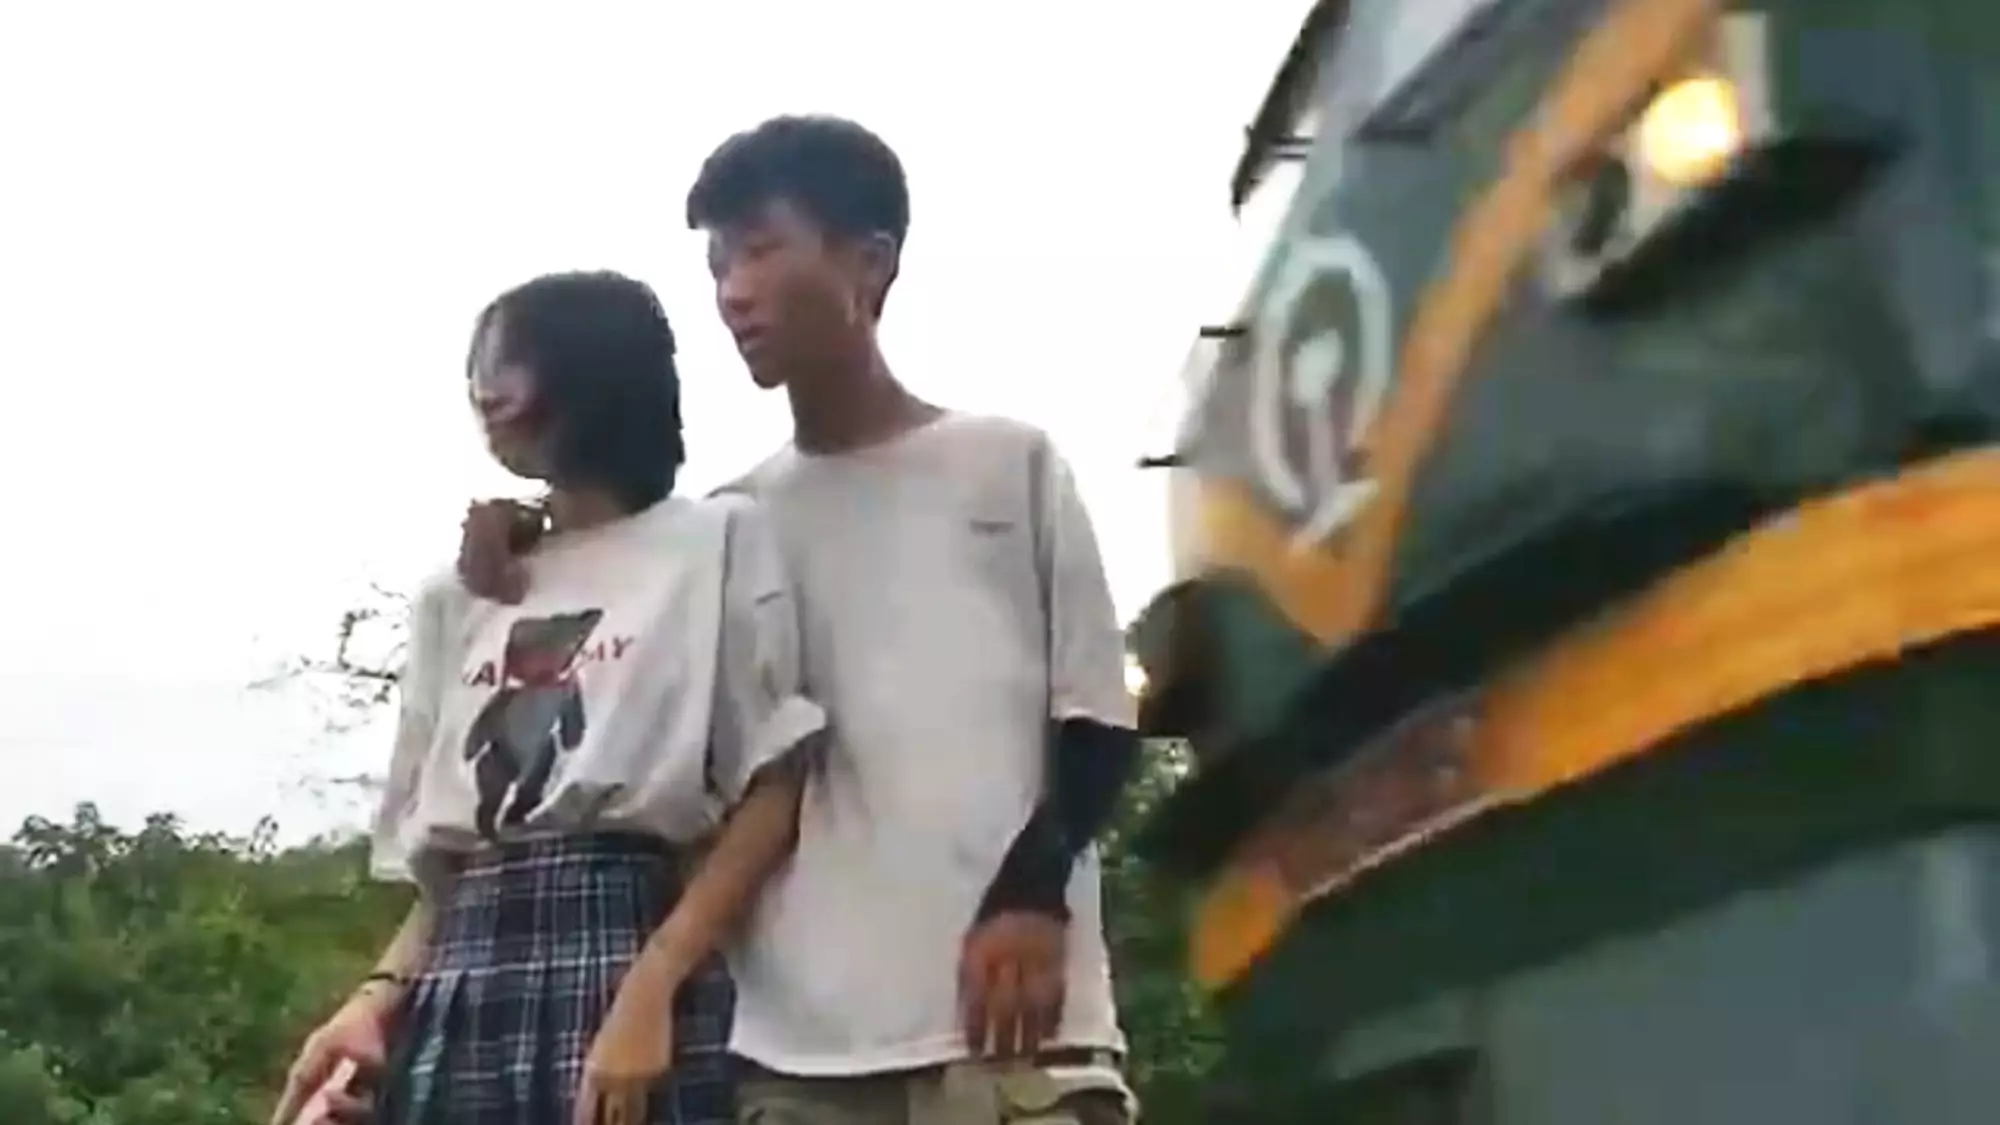 Chinese Couple Narrowly Avoid Freight Train While Filming For Social Media